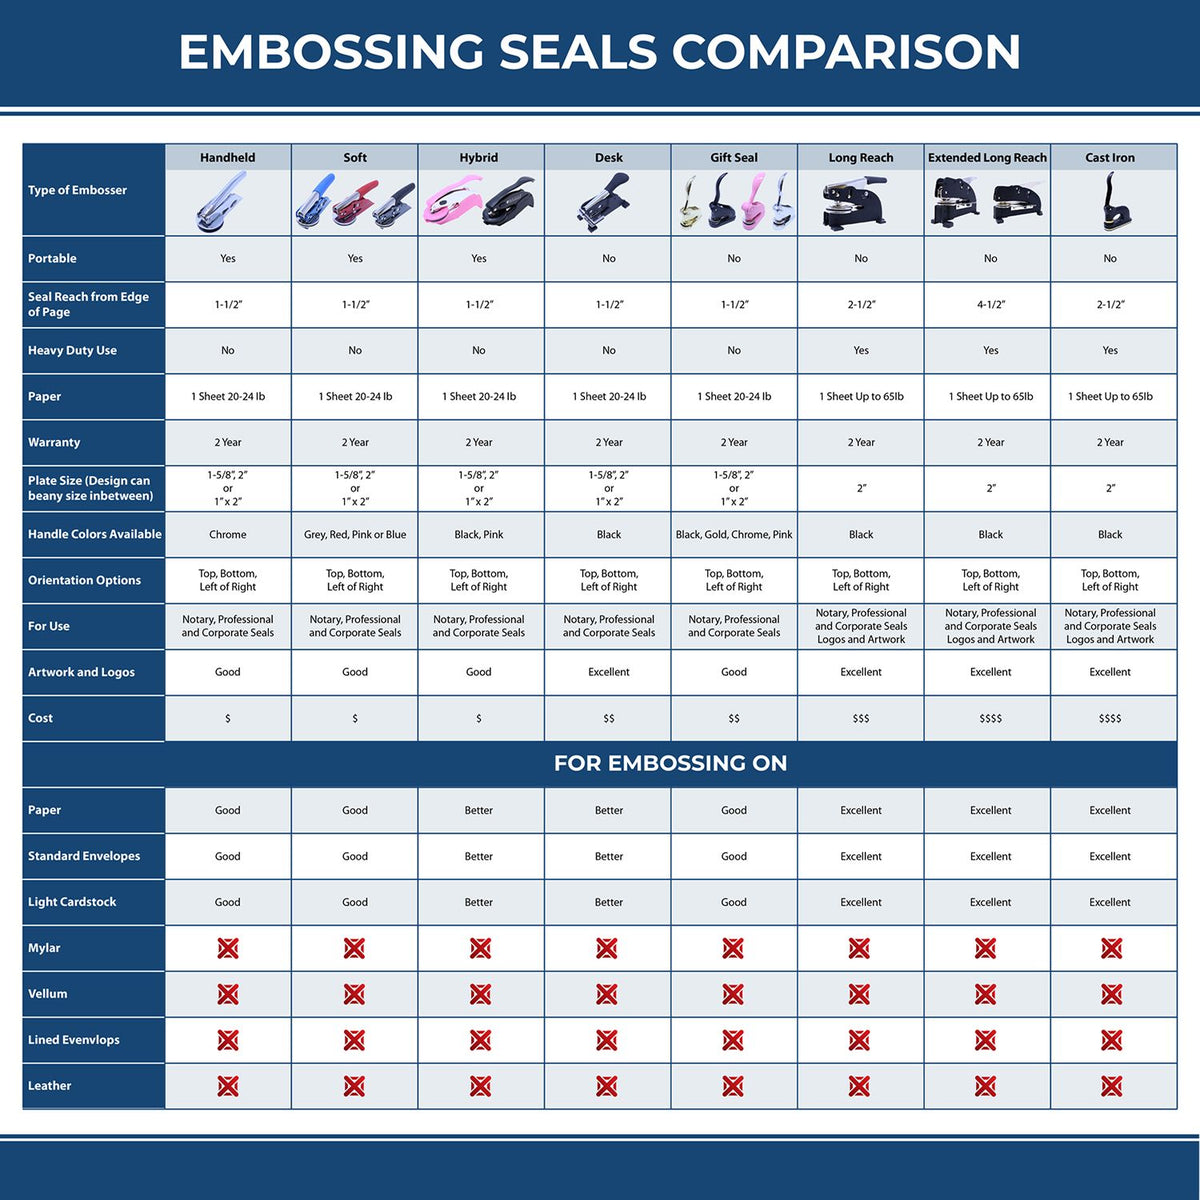 A comparison chart for the different types of mount models available for the Hybrid Illinois Geologist Seal